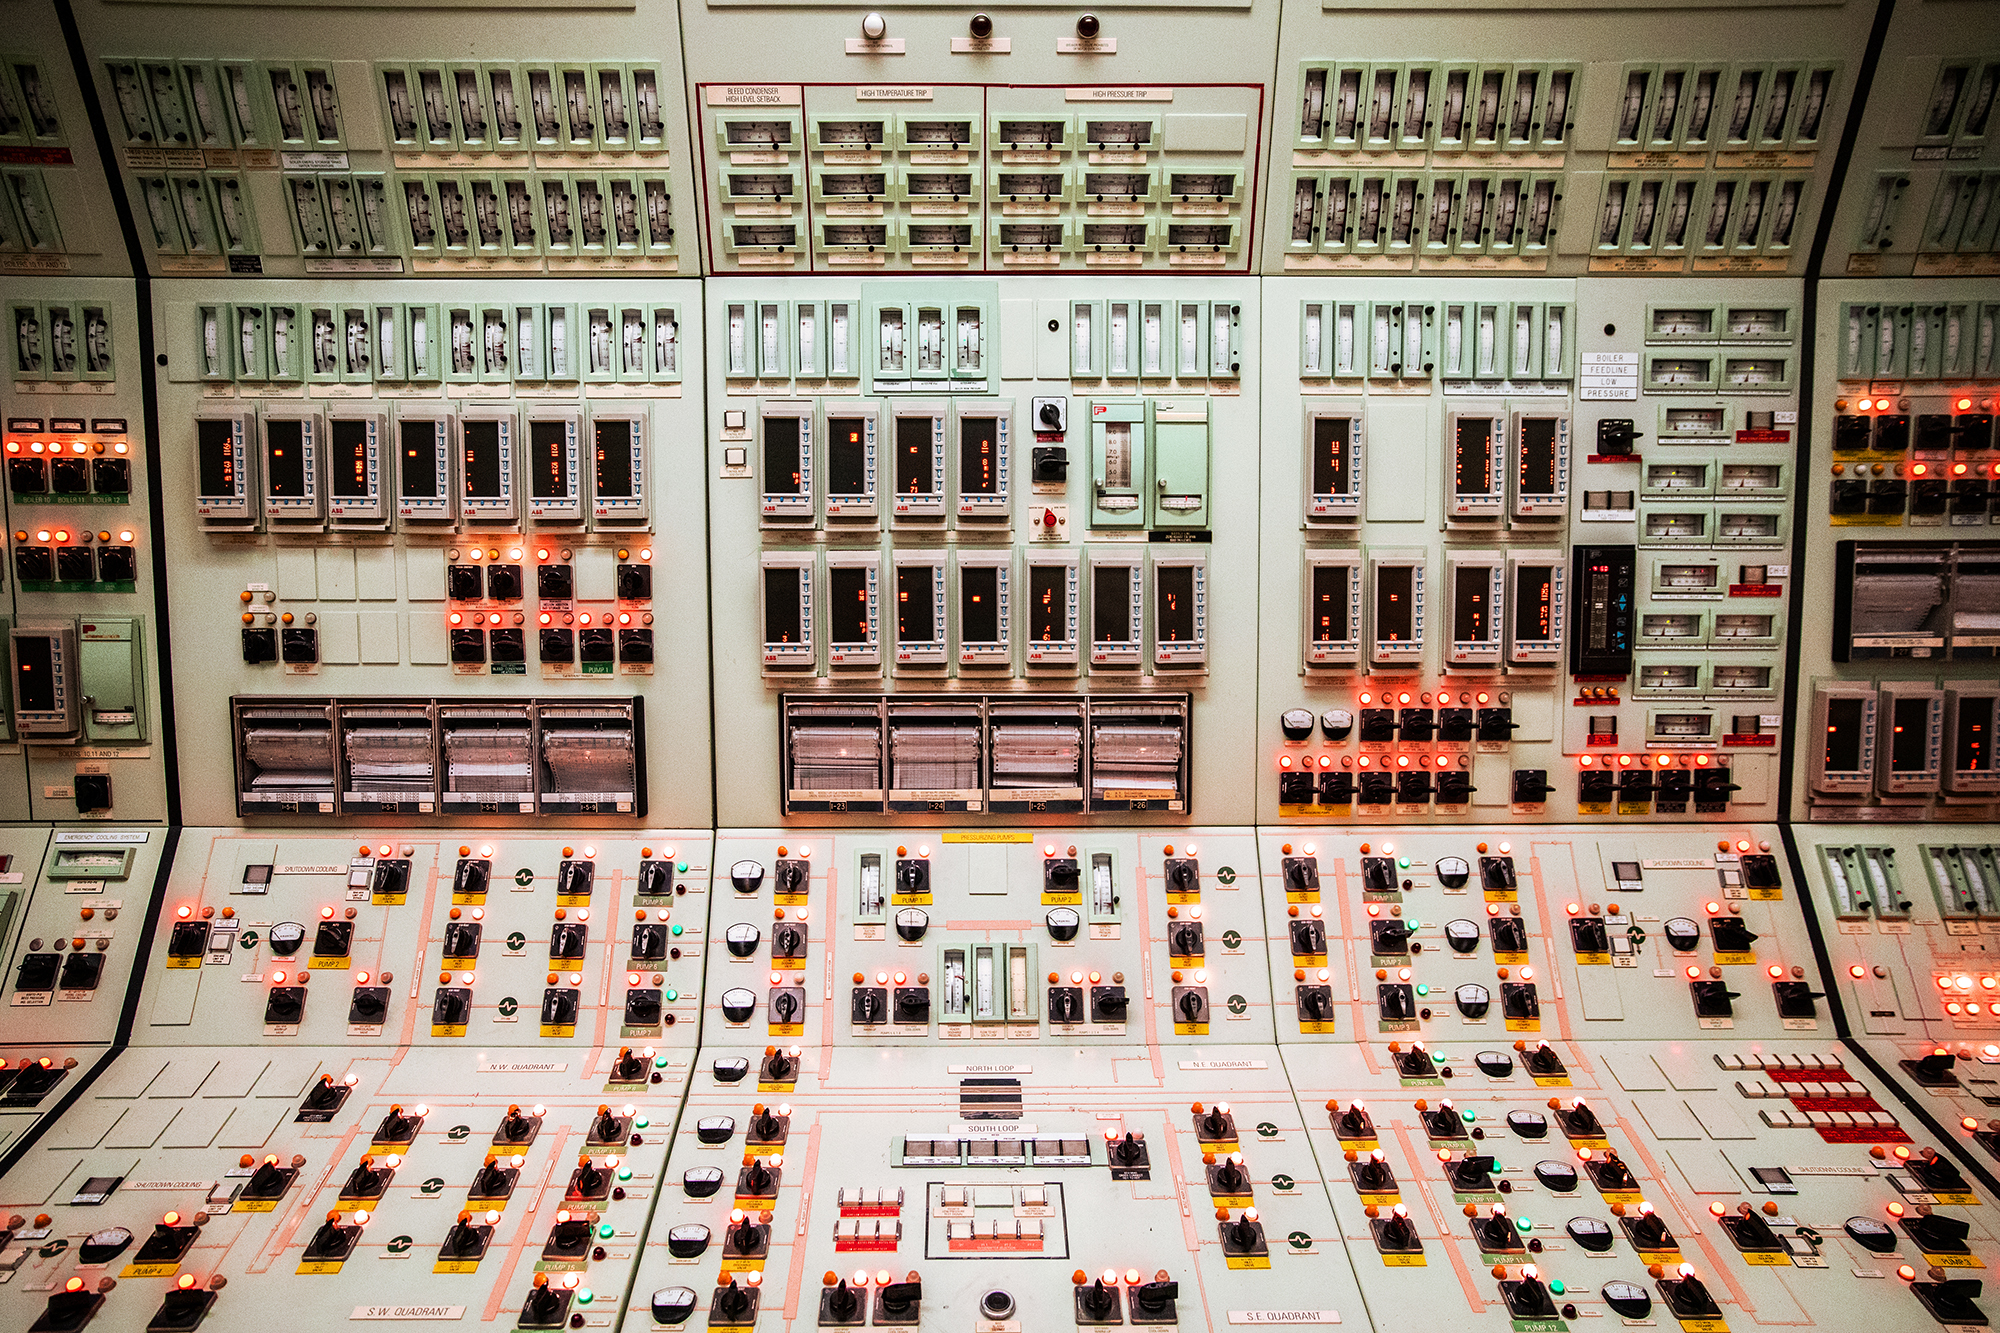 A control panel from the Pickering Nuclear Generating Station